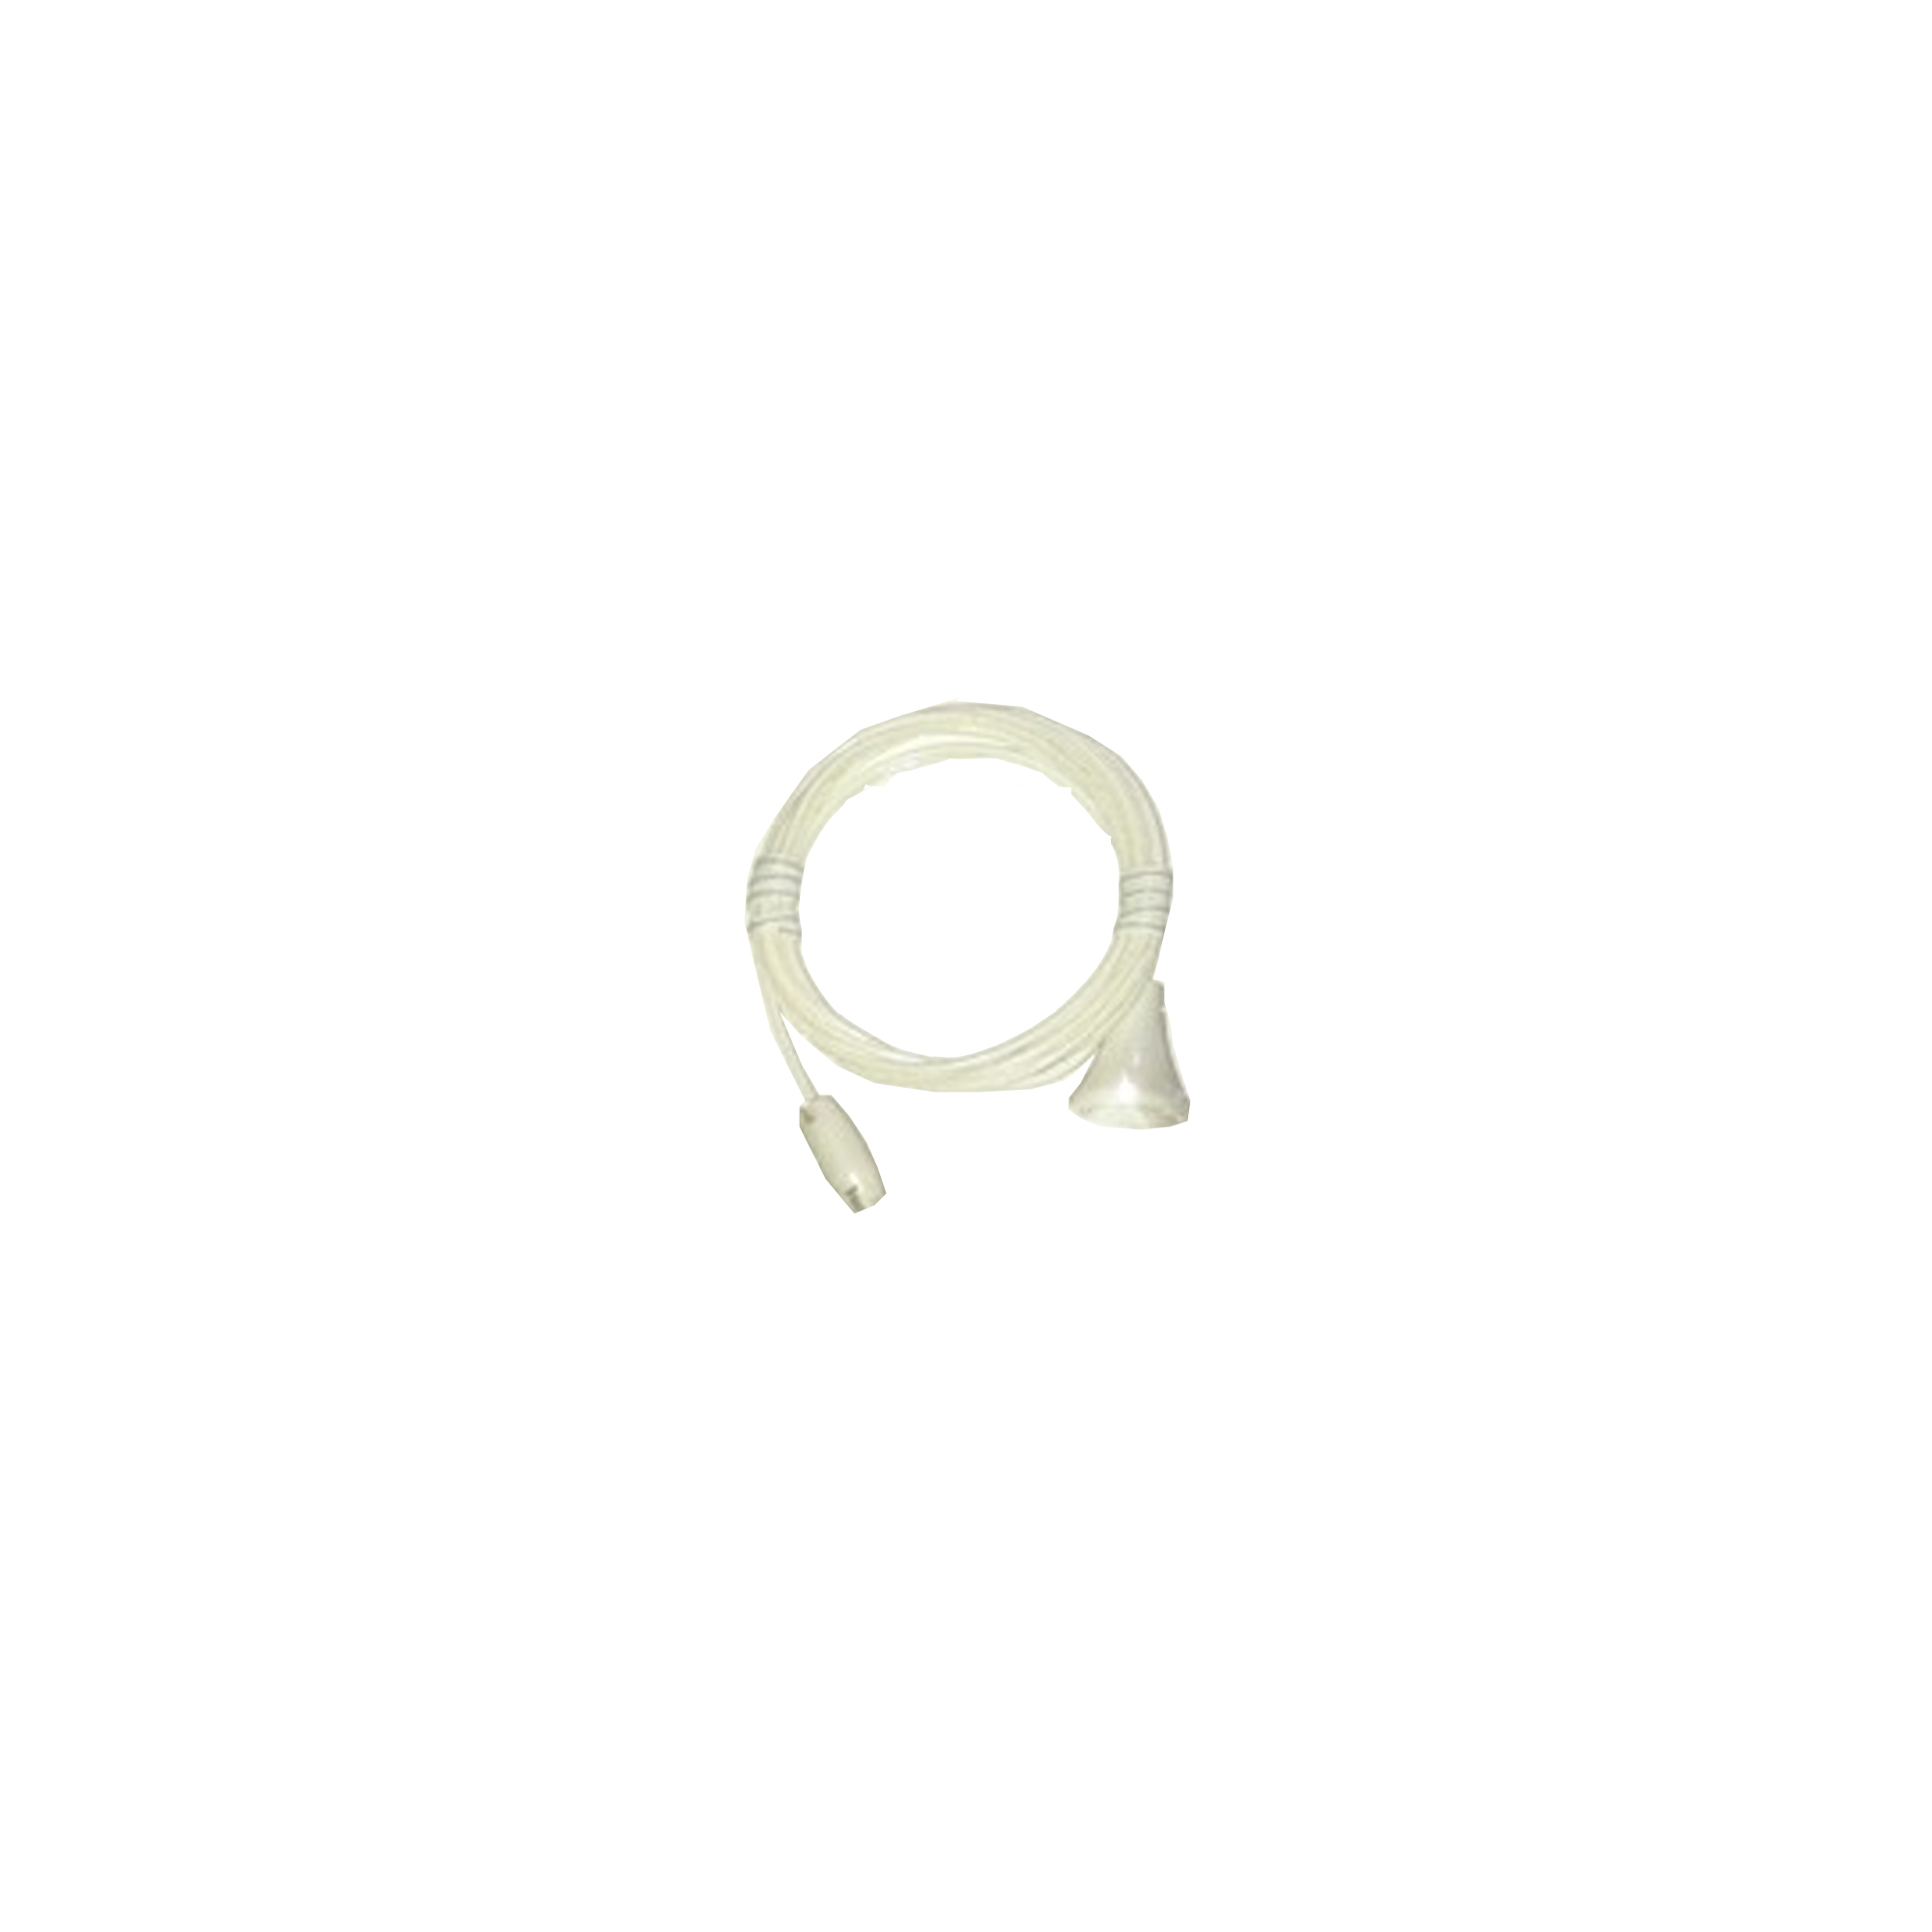 Biomaster Clean White Pullcord With Acorn Connector - 3M - Each